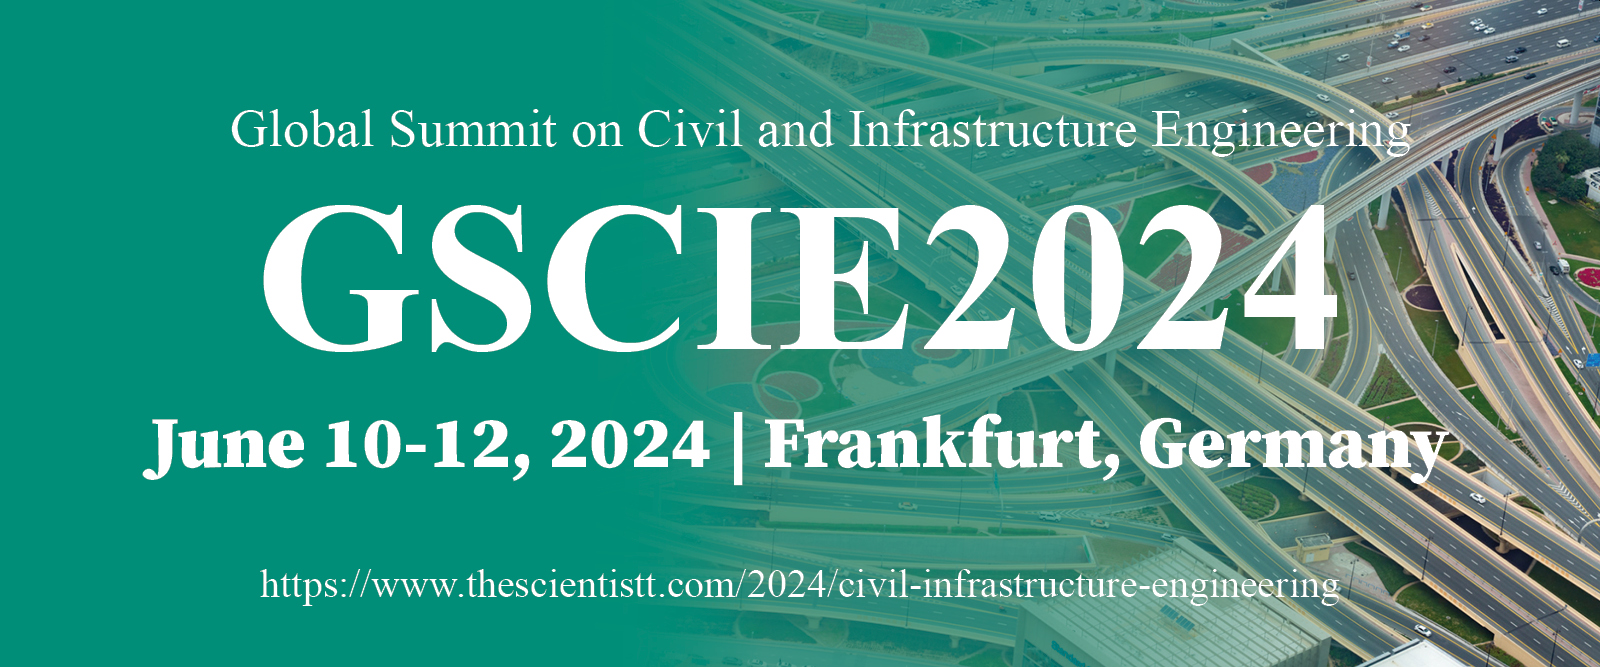 Global Summit on Civil and Infrastructure Engineering (GSCIE2024)